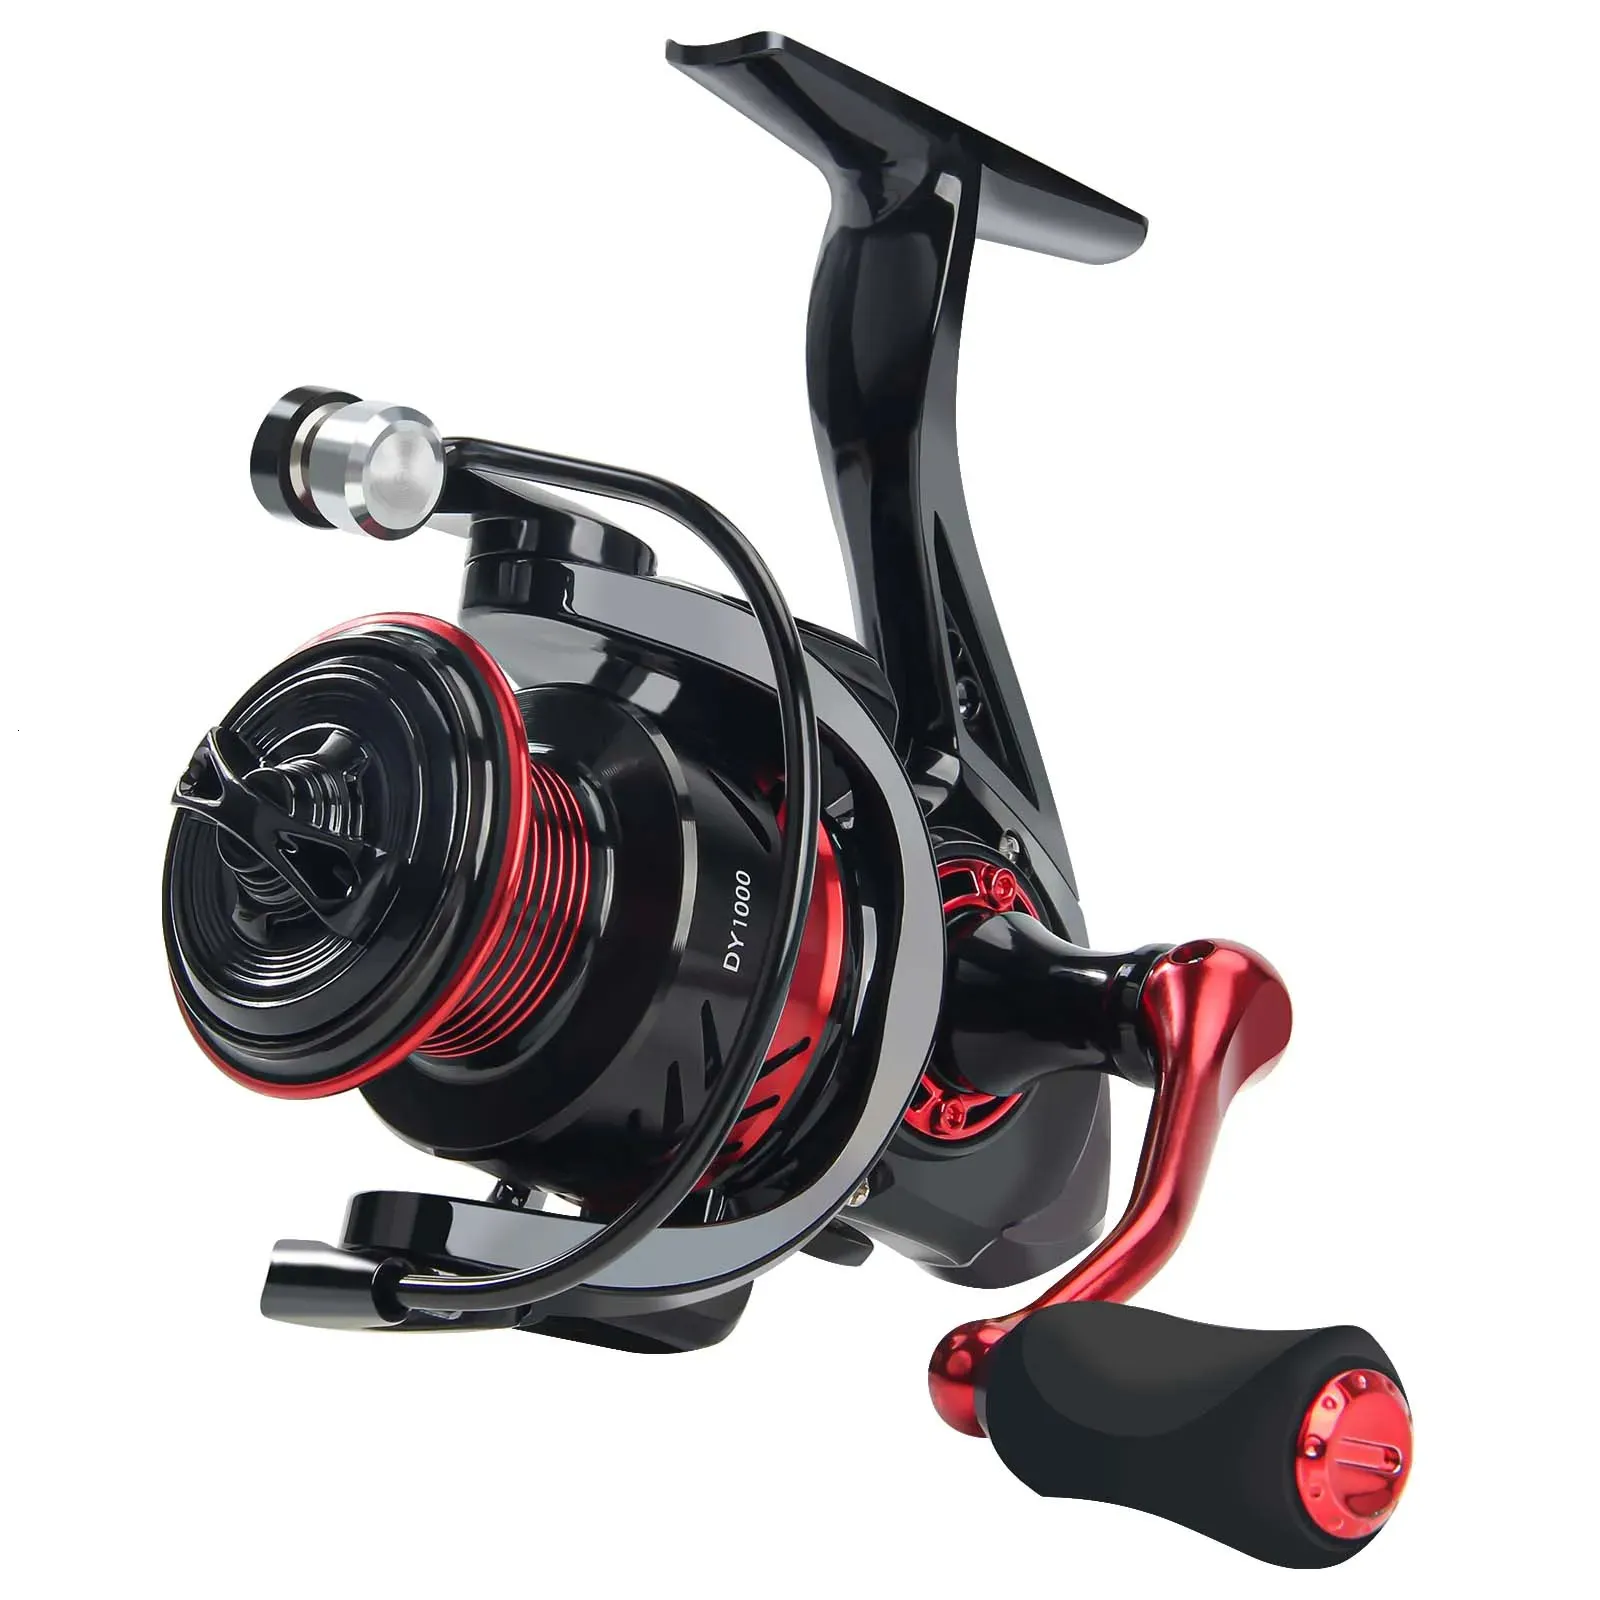 HAUT TON Baitcaster Spinning Reel Spinning Reel With Drag System